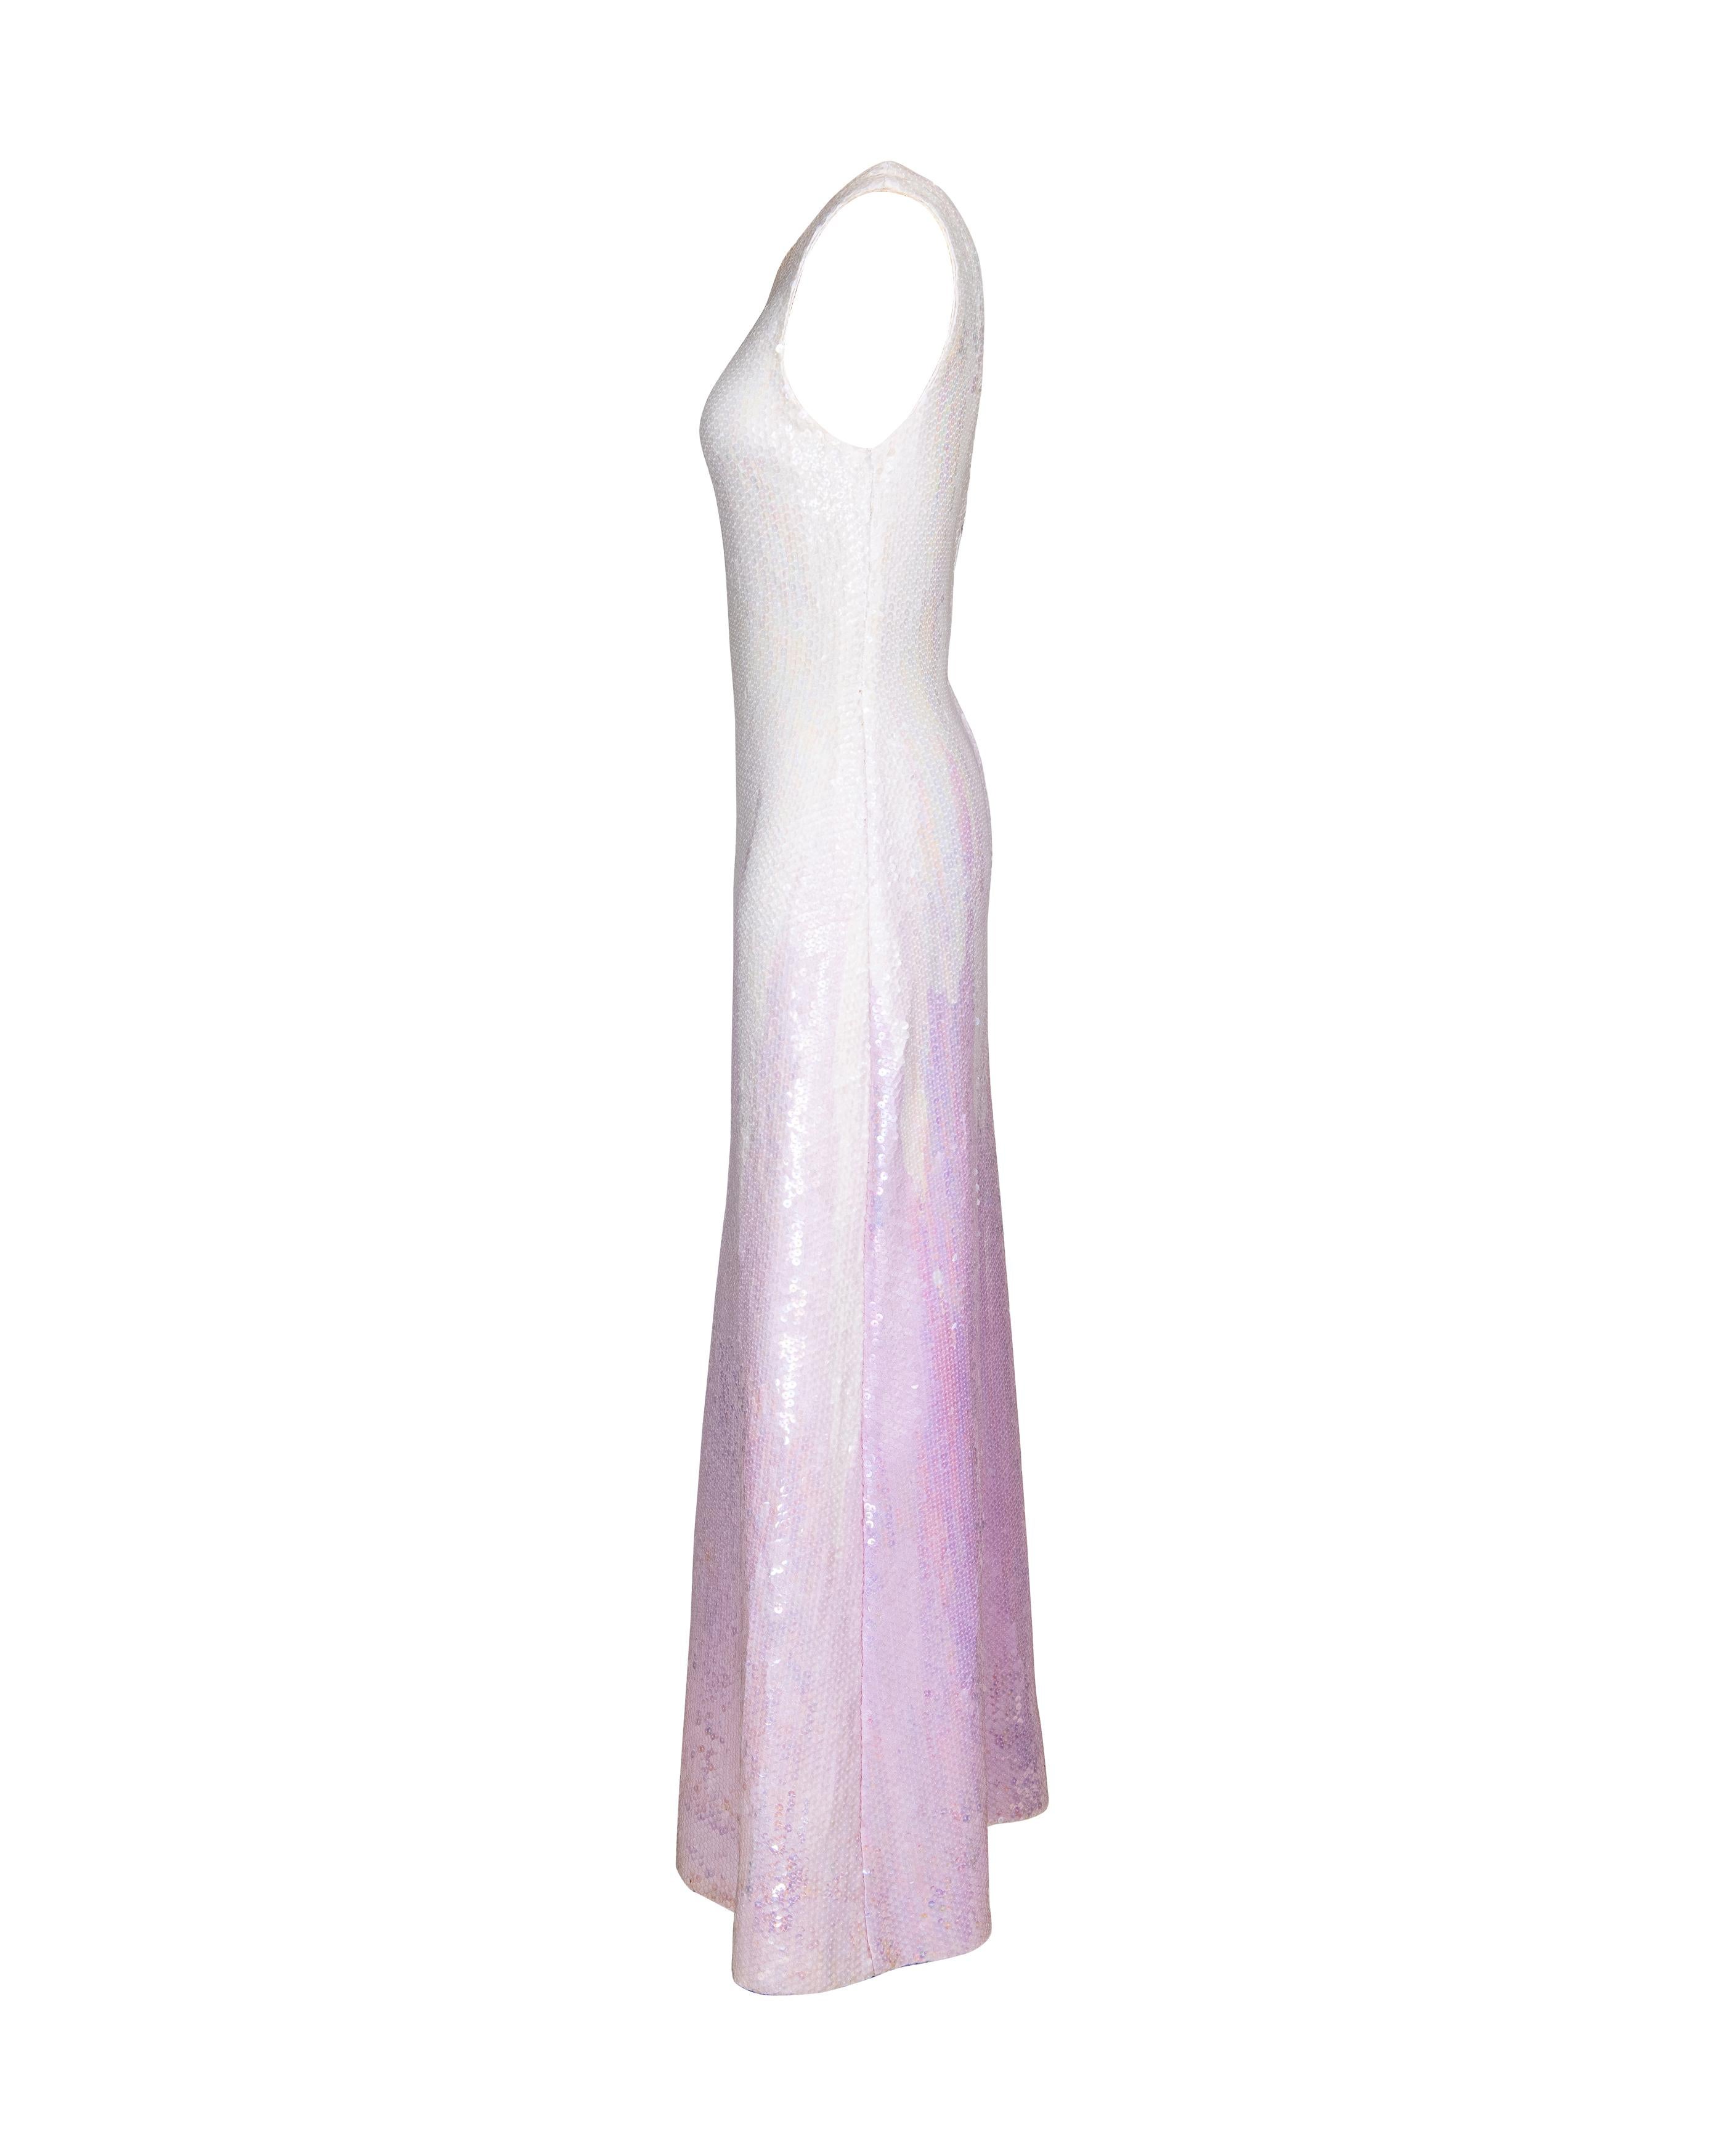 Women's A/W 1973 Halston Sleeveless Geometric Point Sequin Gradient Gown For Sale